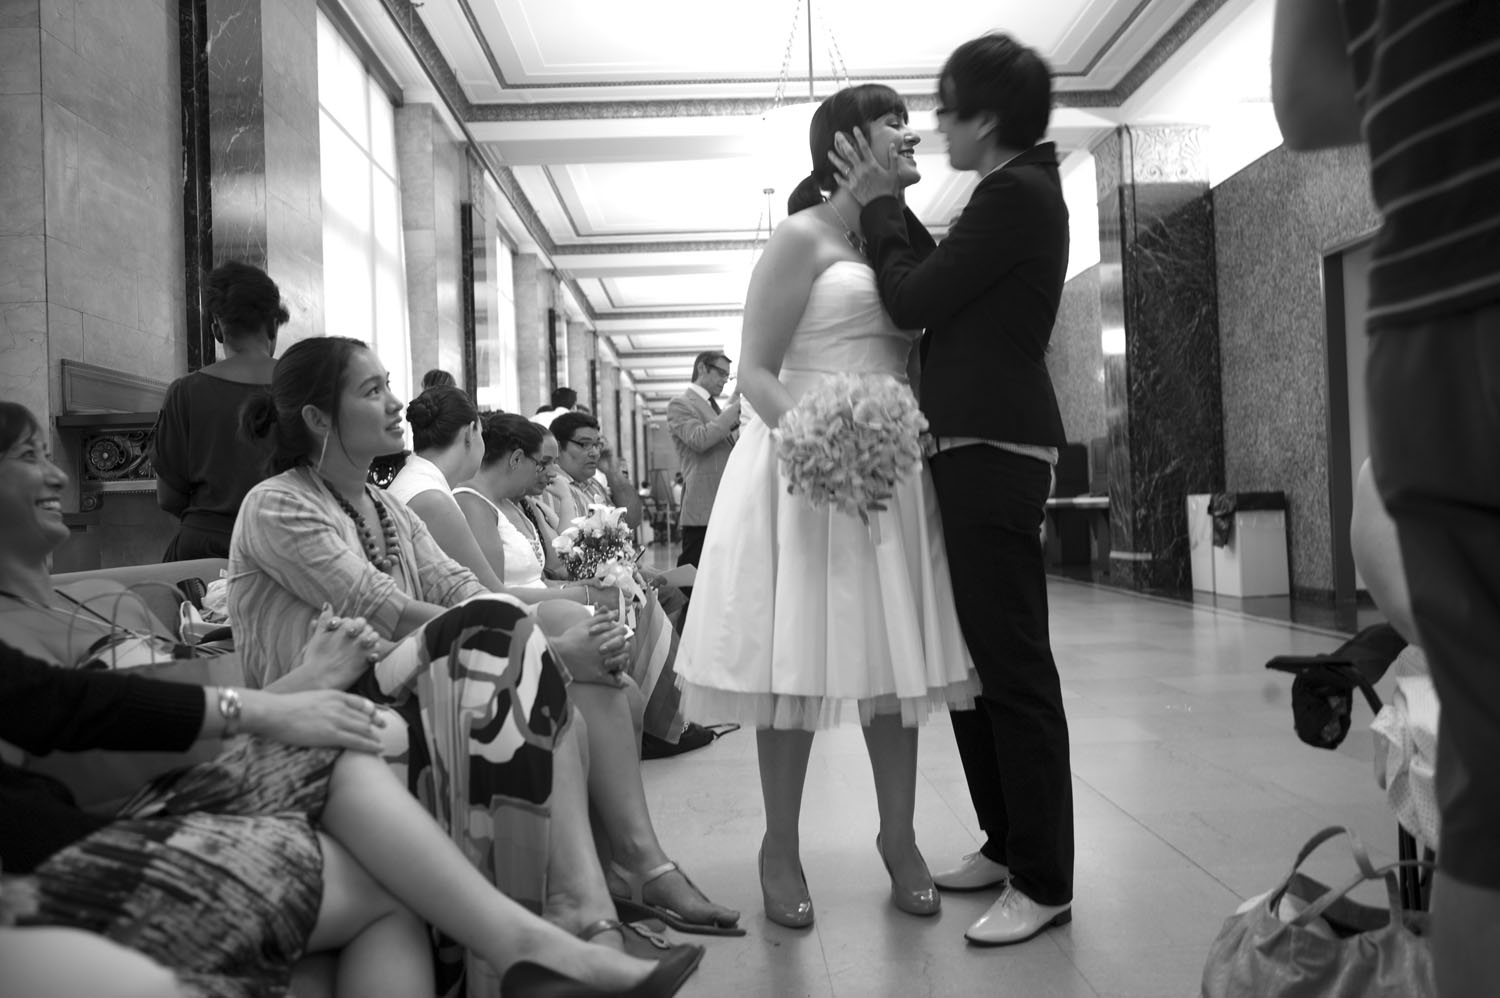 Inside the City Clerk's office, couples, families, witnesses, and well-wishers waited in lines for hours to marry. Melissa Barsamian, in white, and Dorothy Kim, have been together for more than four years.